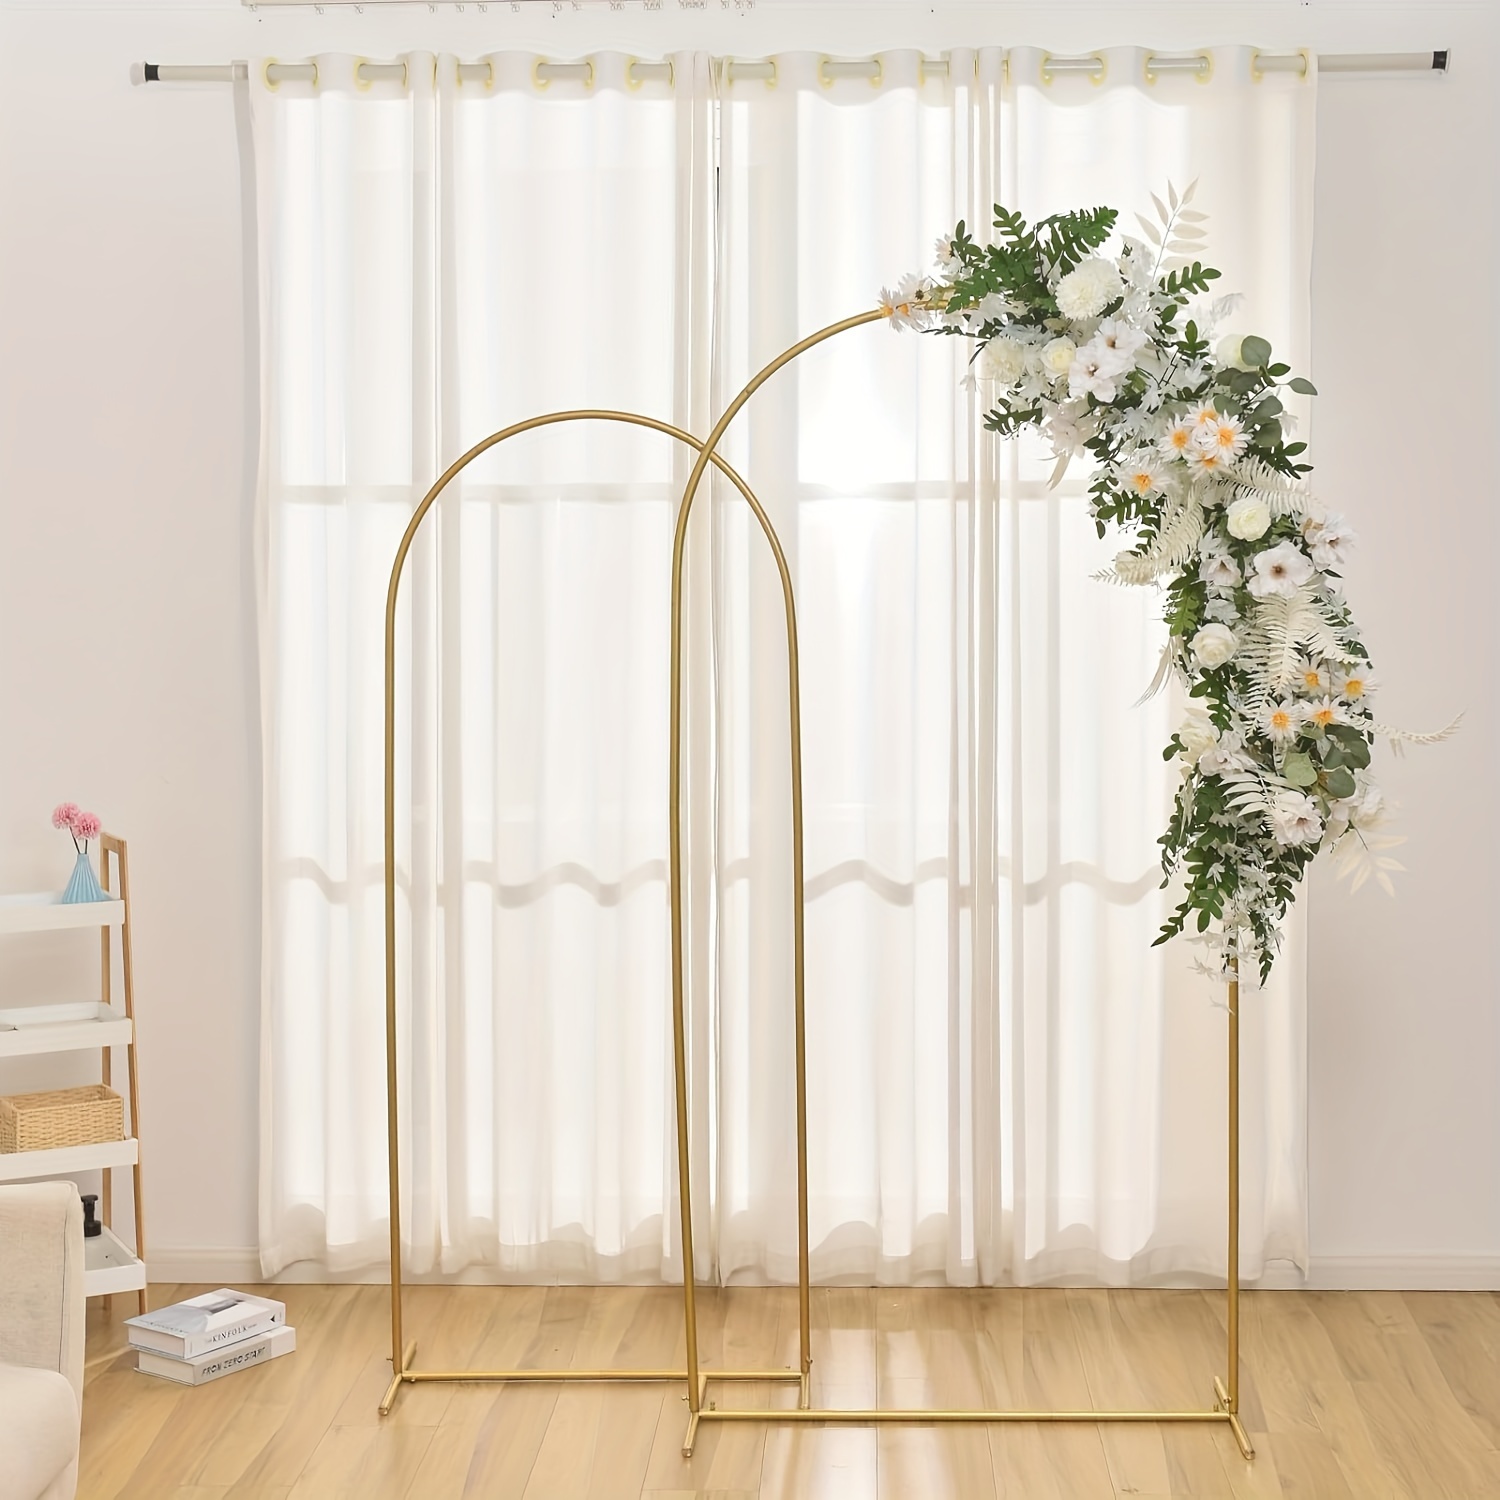 

5.9ft 6.6ft Metal Wedding Arch Backdrop Stand Gold Ballon Arch Stand Set Of 2 For Birthday Party Wedding Ceremony Baby Shower Graduation Decoration